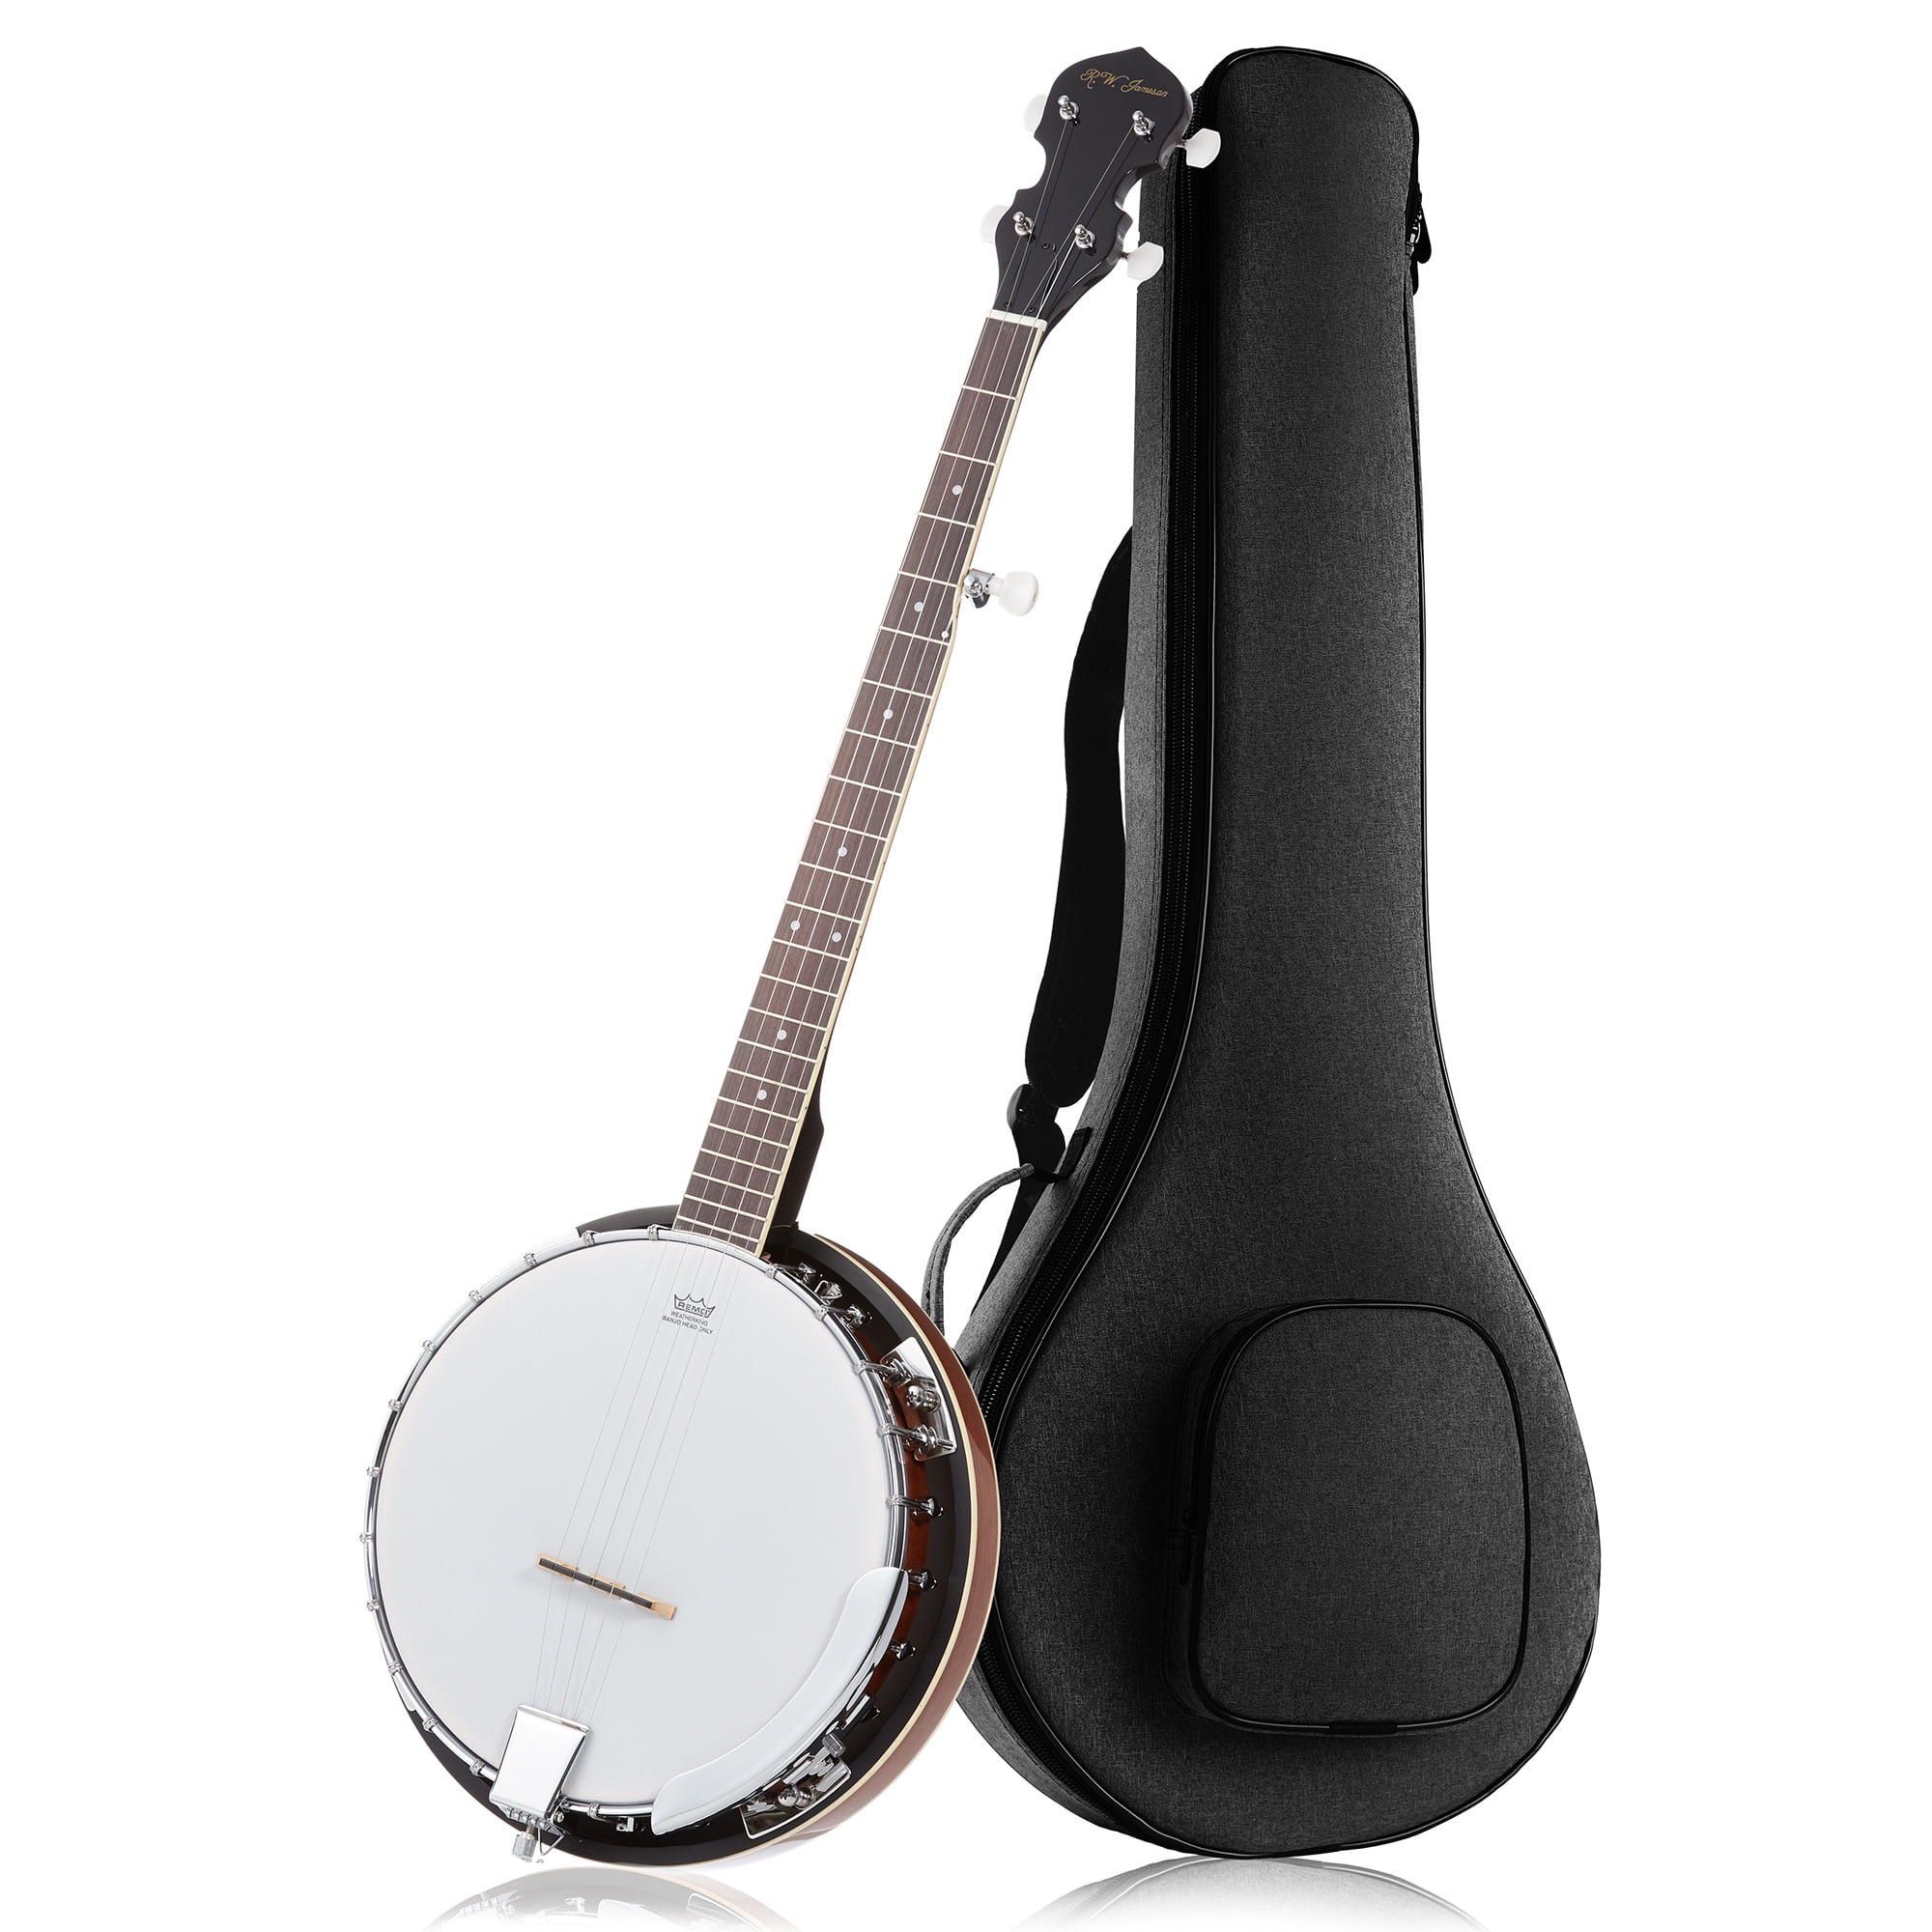 5 String Banjo 24 Bracket,Mahogany Open-back Banjo with Resonator and Geared 5th Tuner Pickup Strings 2 Picks,2 Wrench Bridge,cloth and Bag Strap Banjoe Beginner Kit with Tuner 39 IN 